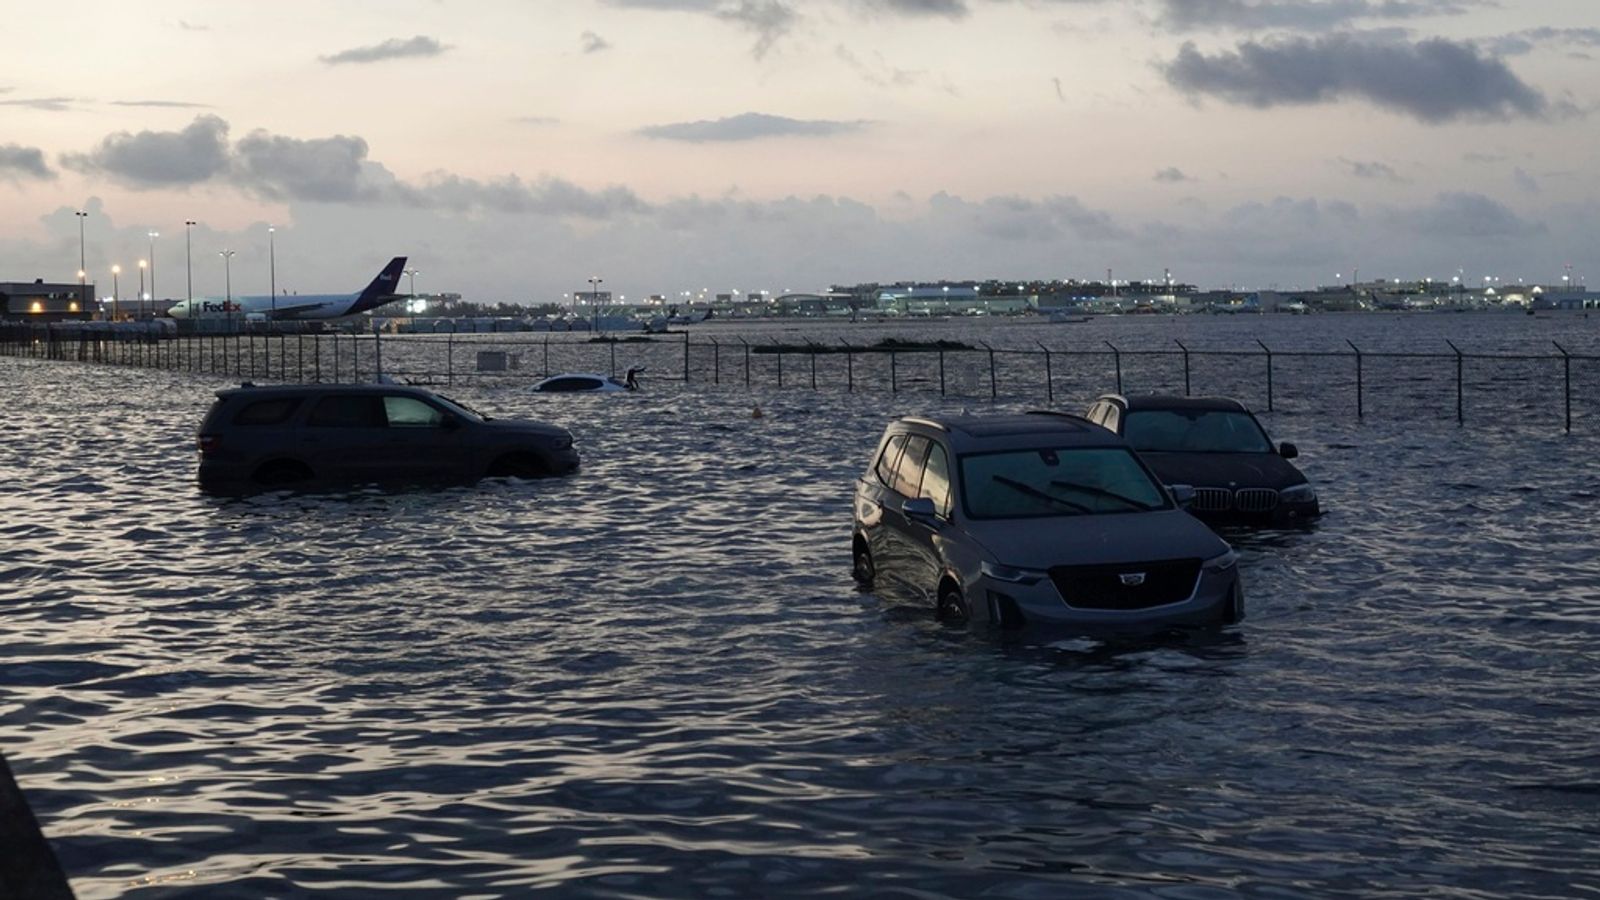 South Florida floods: Fort Lauderdale Airport closed as region sees more than two feet of rain